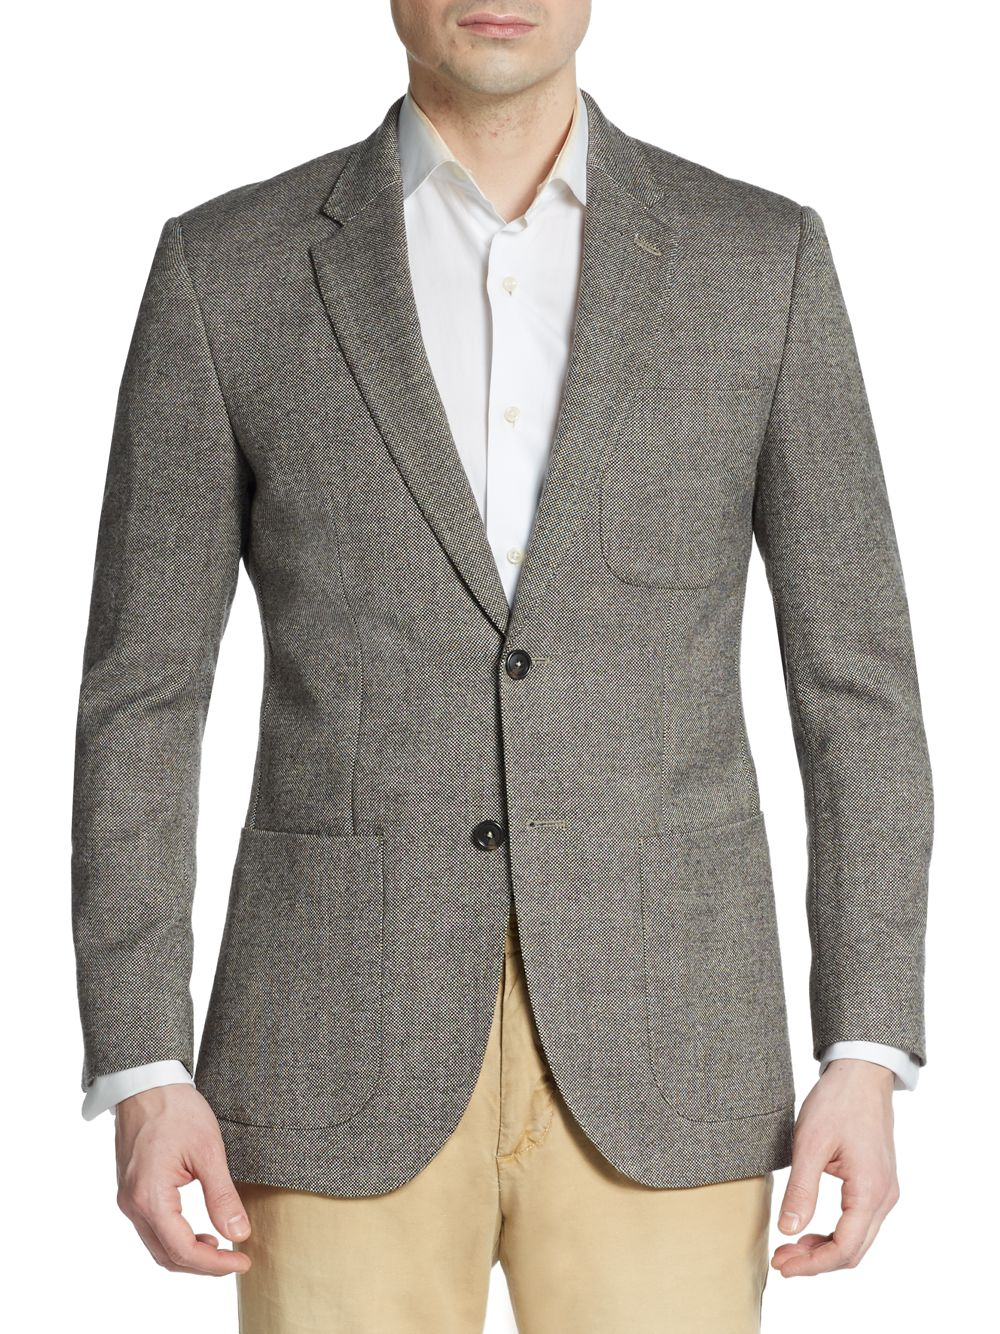 Lyst - English Laundry Regular-fit Tweed Wool-blend Sportcoat in Brown ...